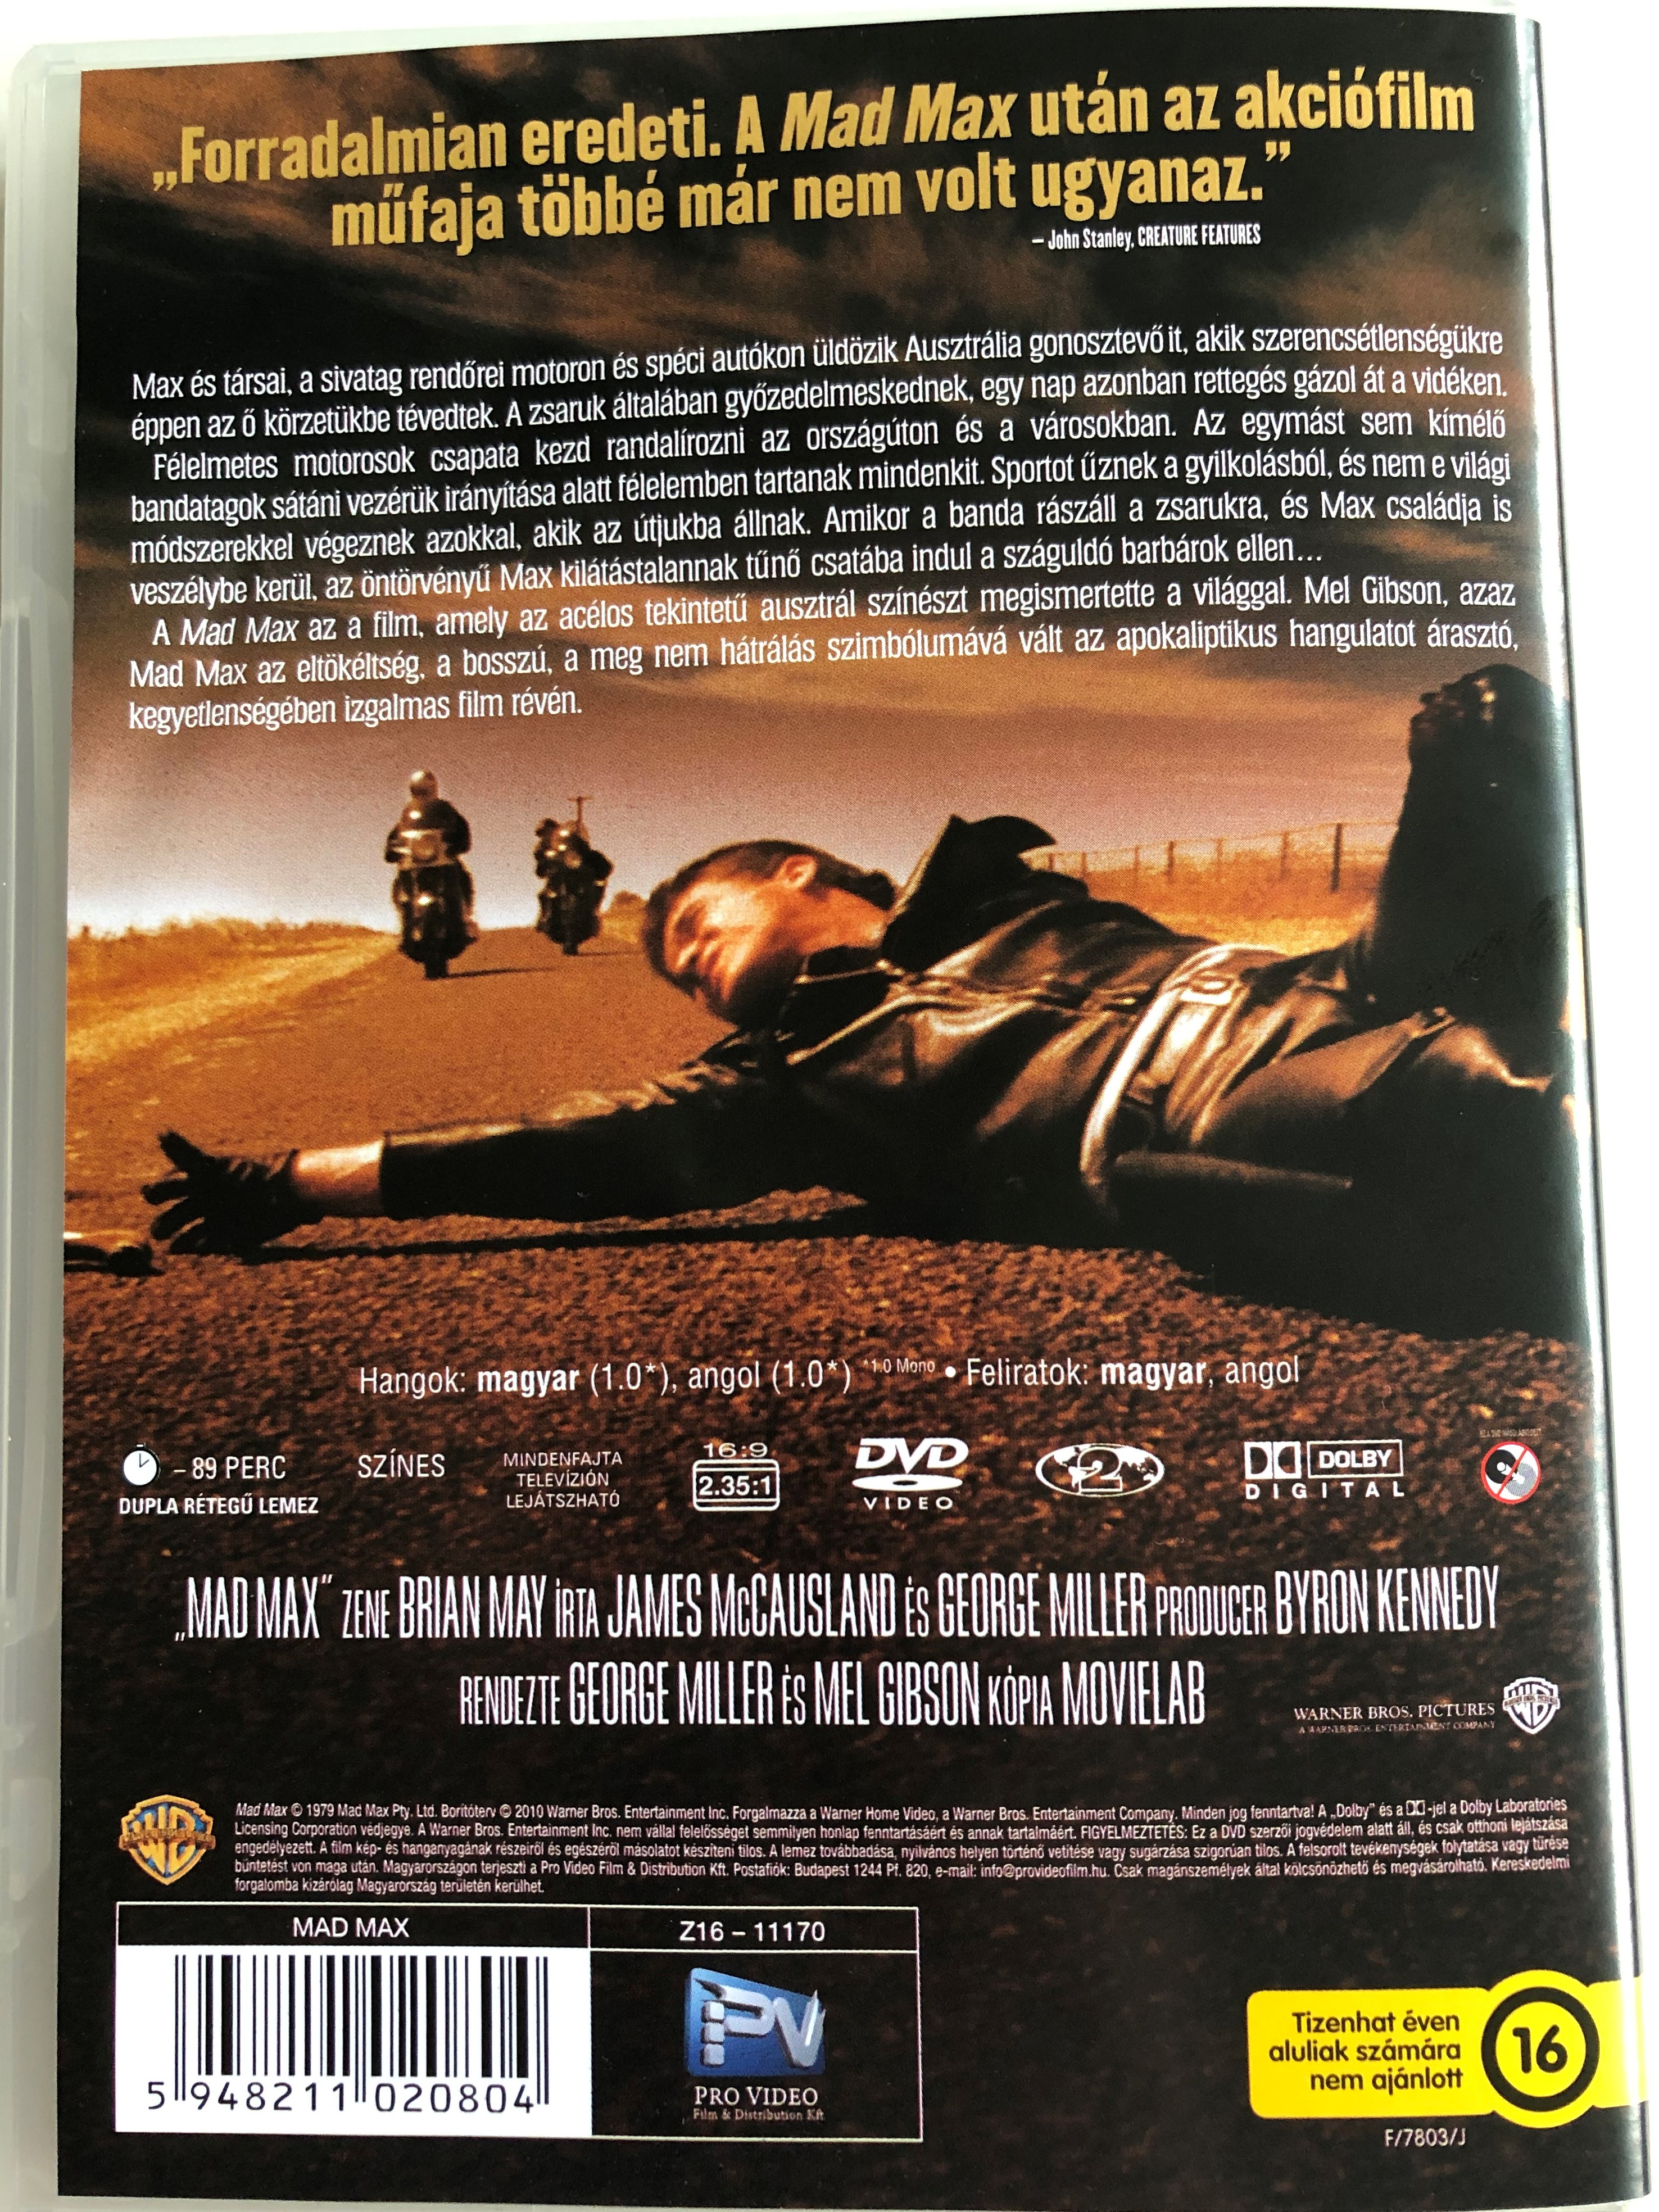 Mad Max DVD 1979 / Directed by George Miller / Starring: Mel